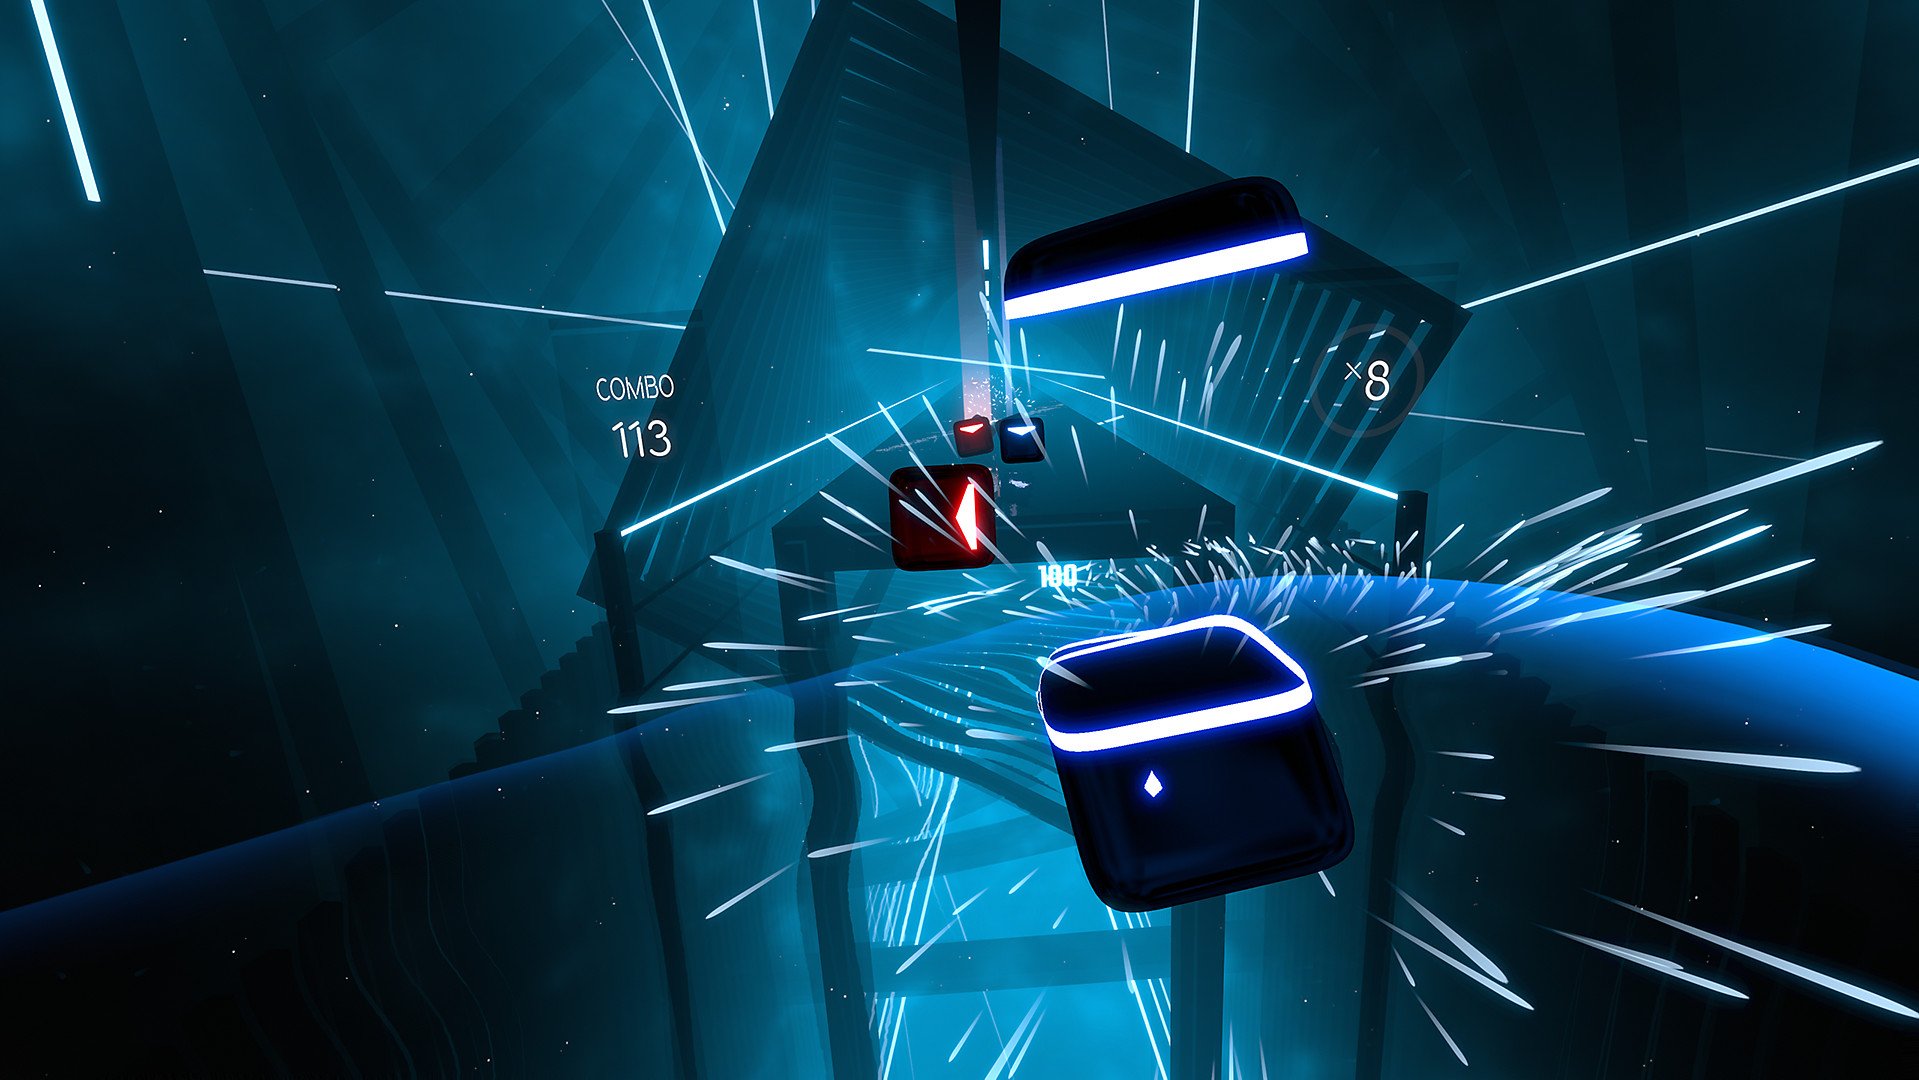 Beat Saber For Playstation Vr Review As Good As You Hoped